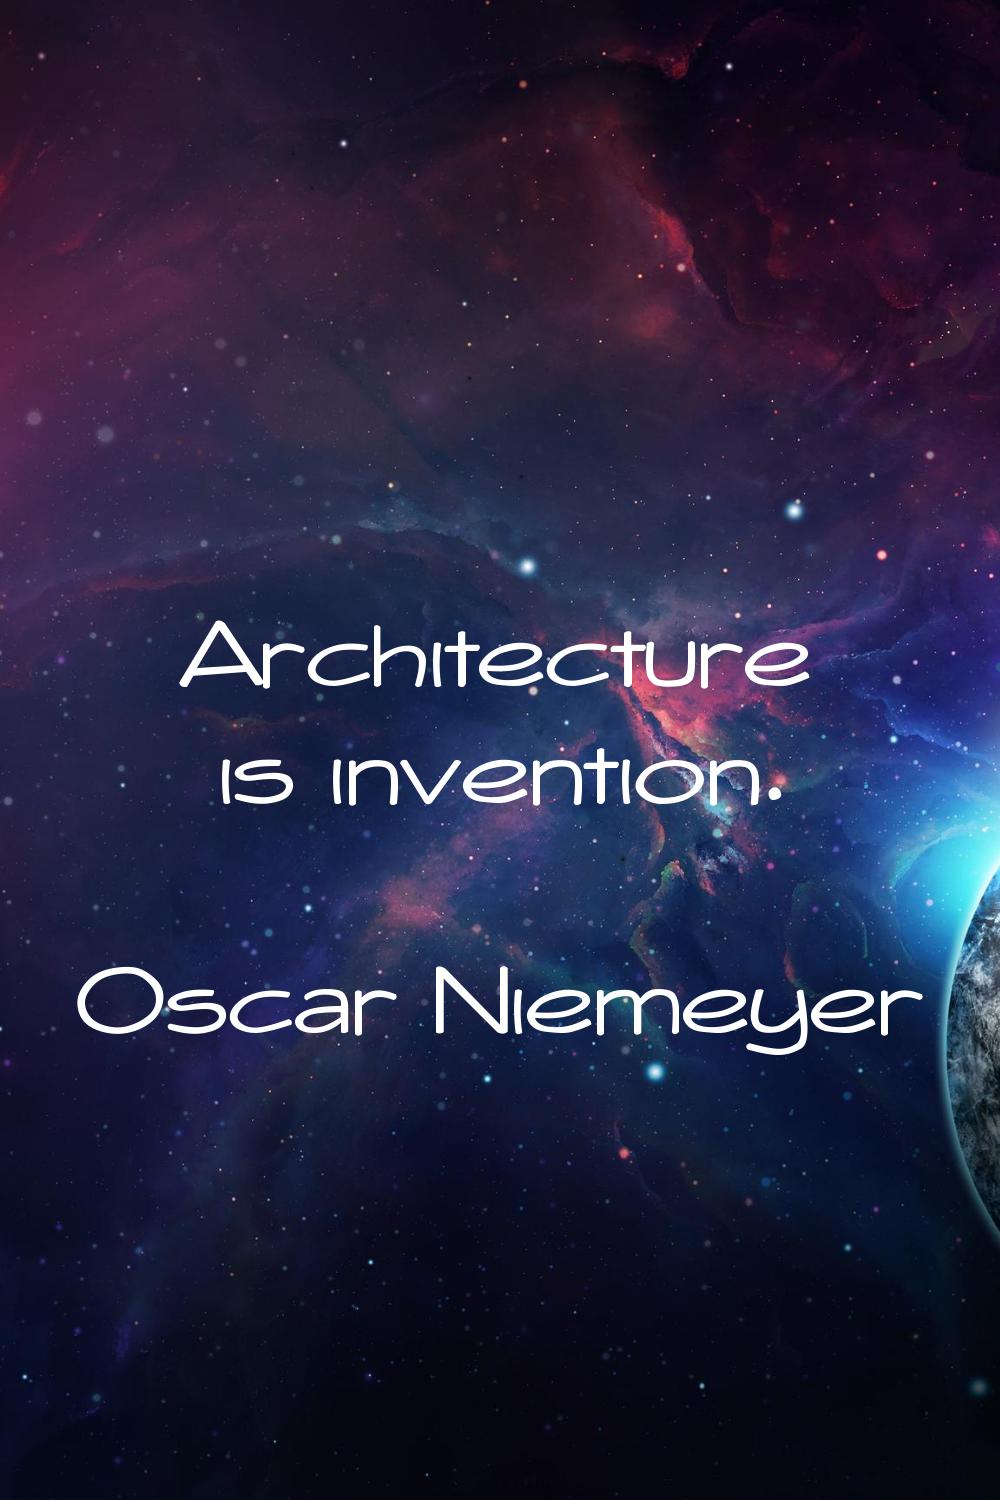 Architecture is invention.